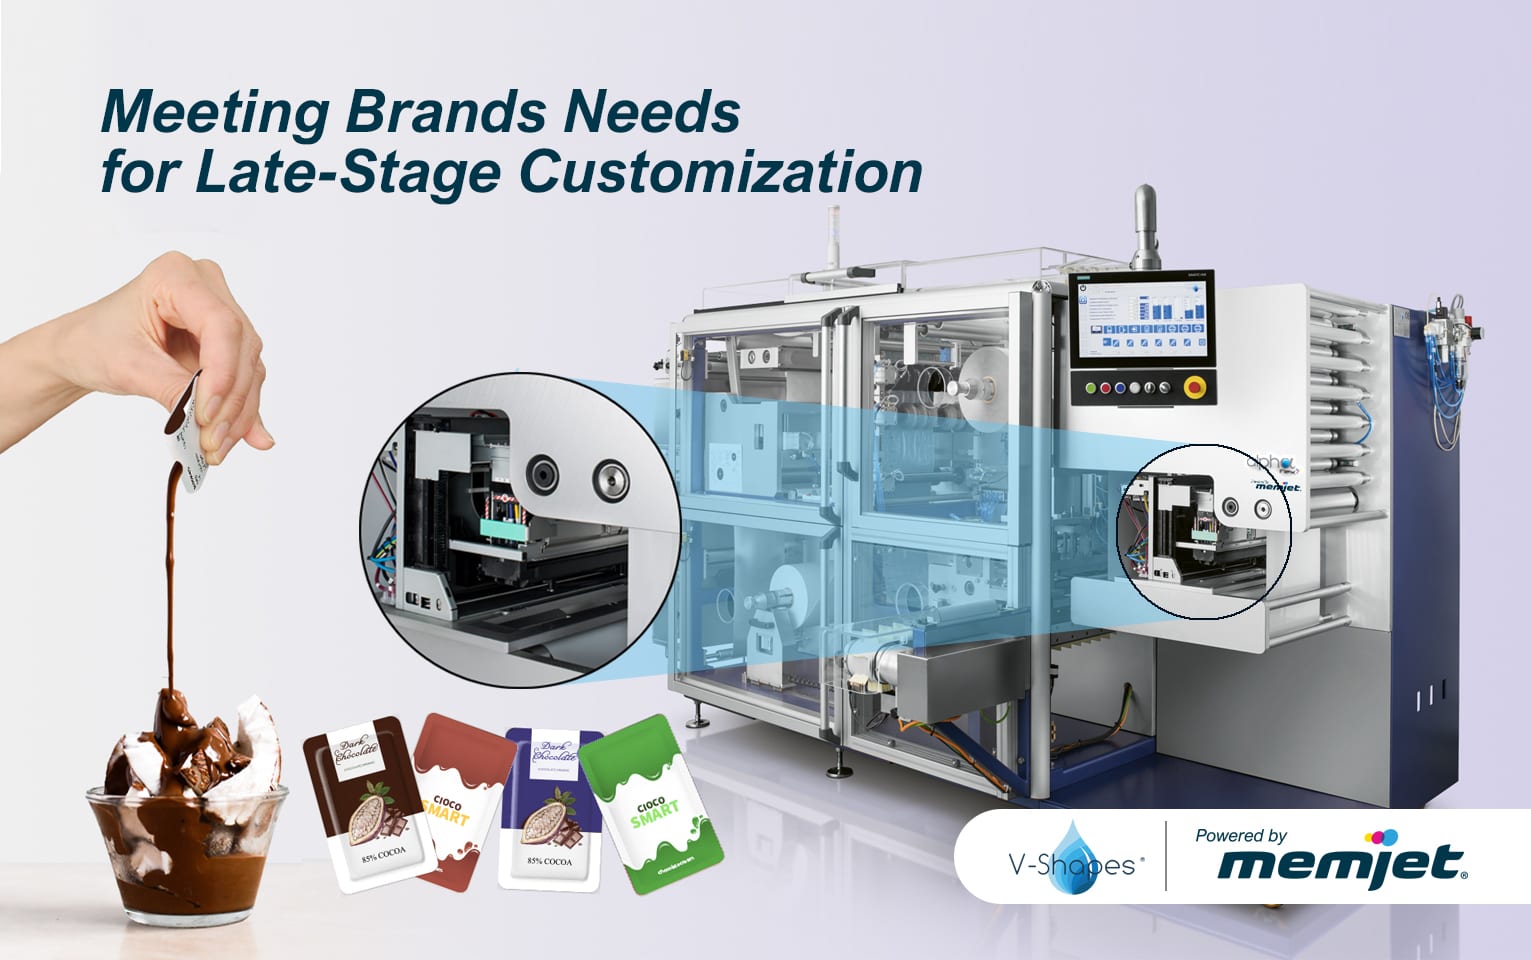 Meeting Brands Needs for Late-Stage Customization